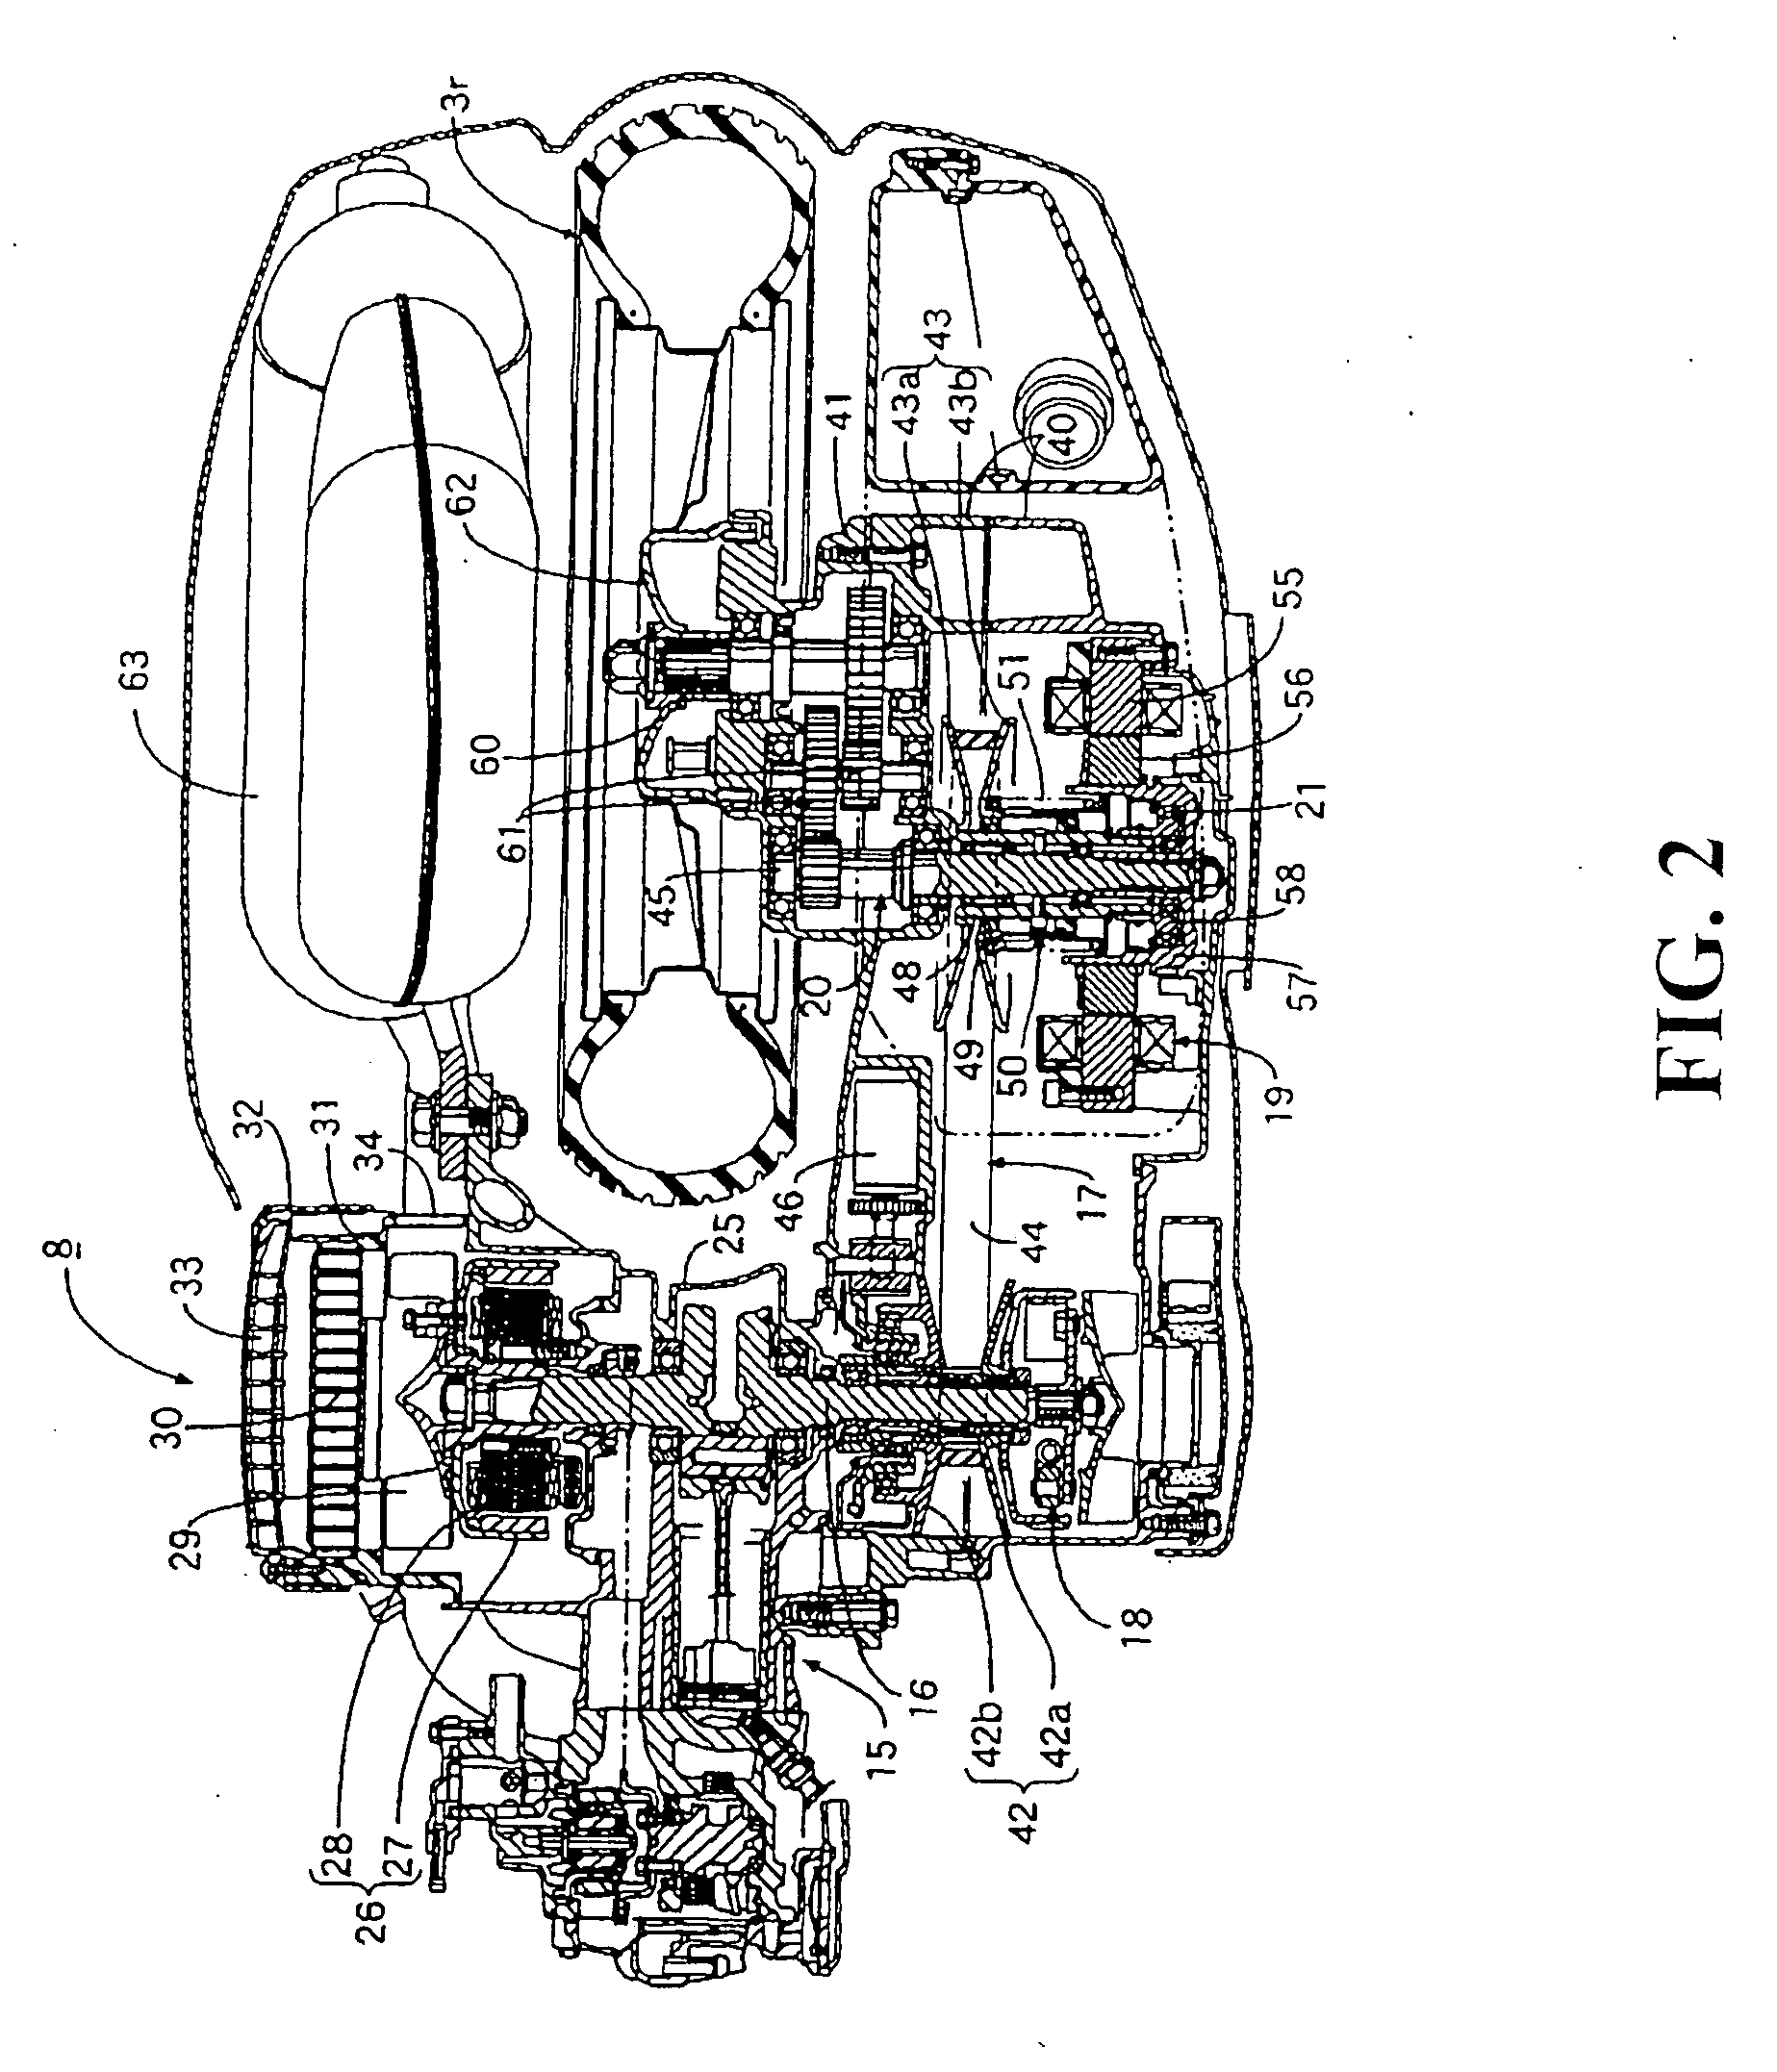 Control mechanism and display for hybrid vehicle